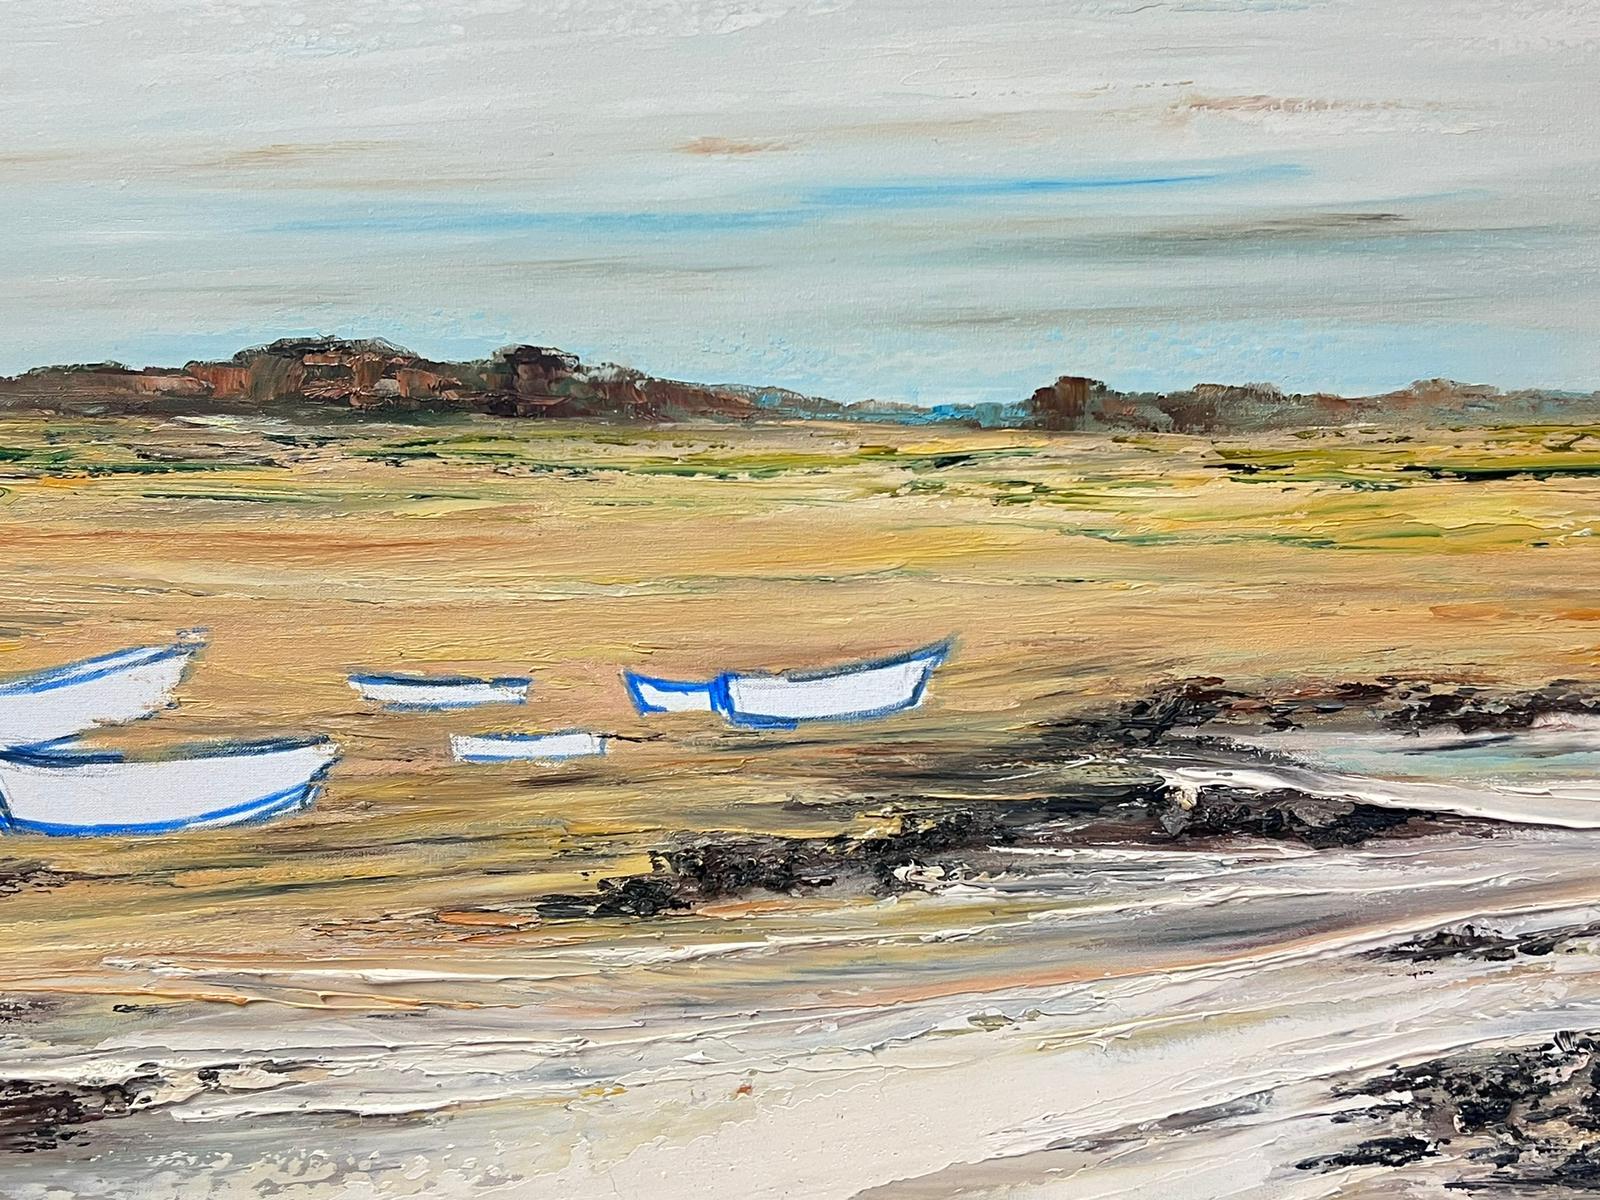 Beached Boats
by Lucien Gondret (French b. 1941)
signed oil painting on canvas, unframed
canvas: 18.5 x 22 inches
provenance: private collection, France
condition: very good and sound condition 
